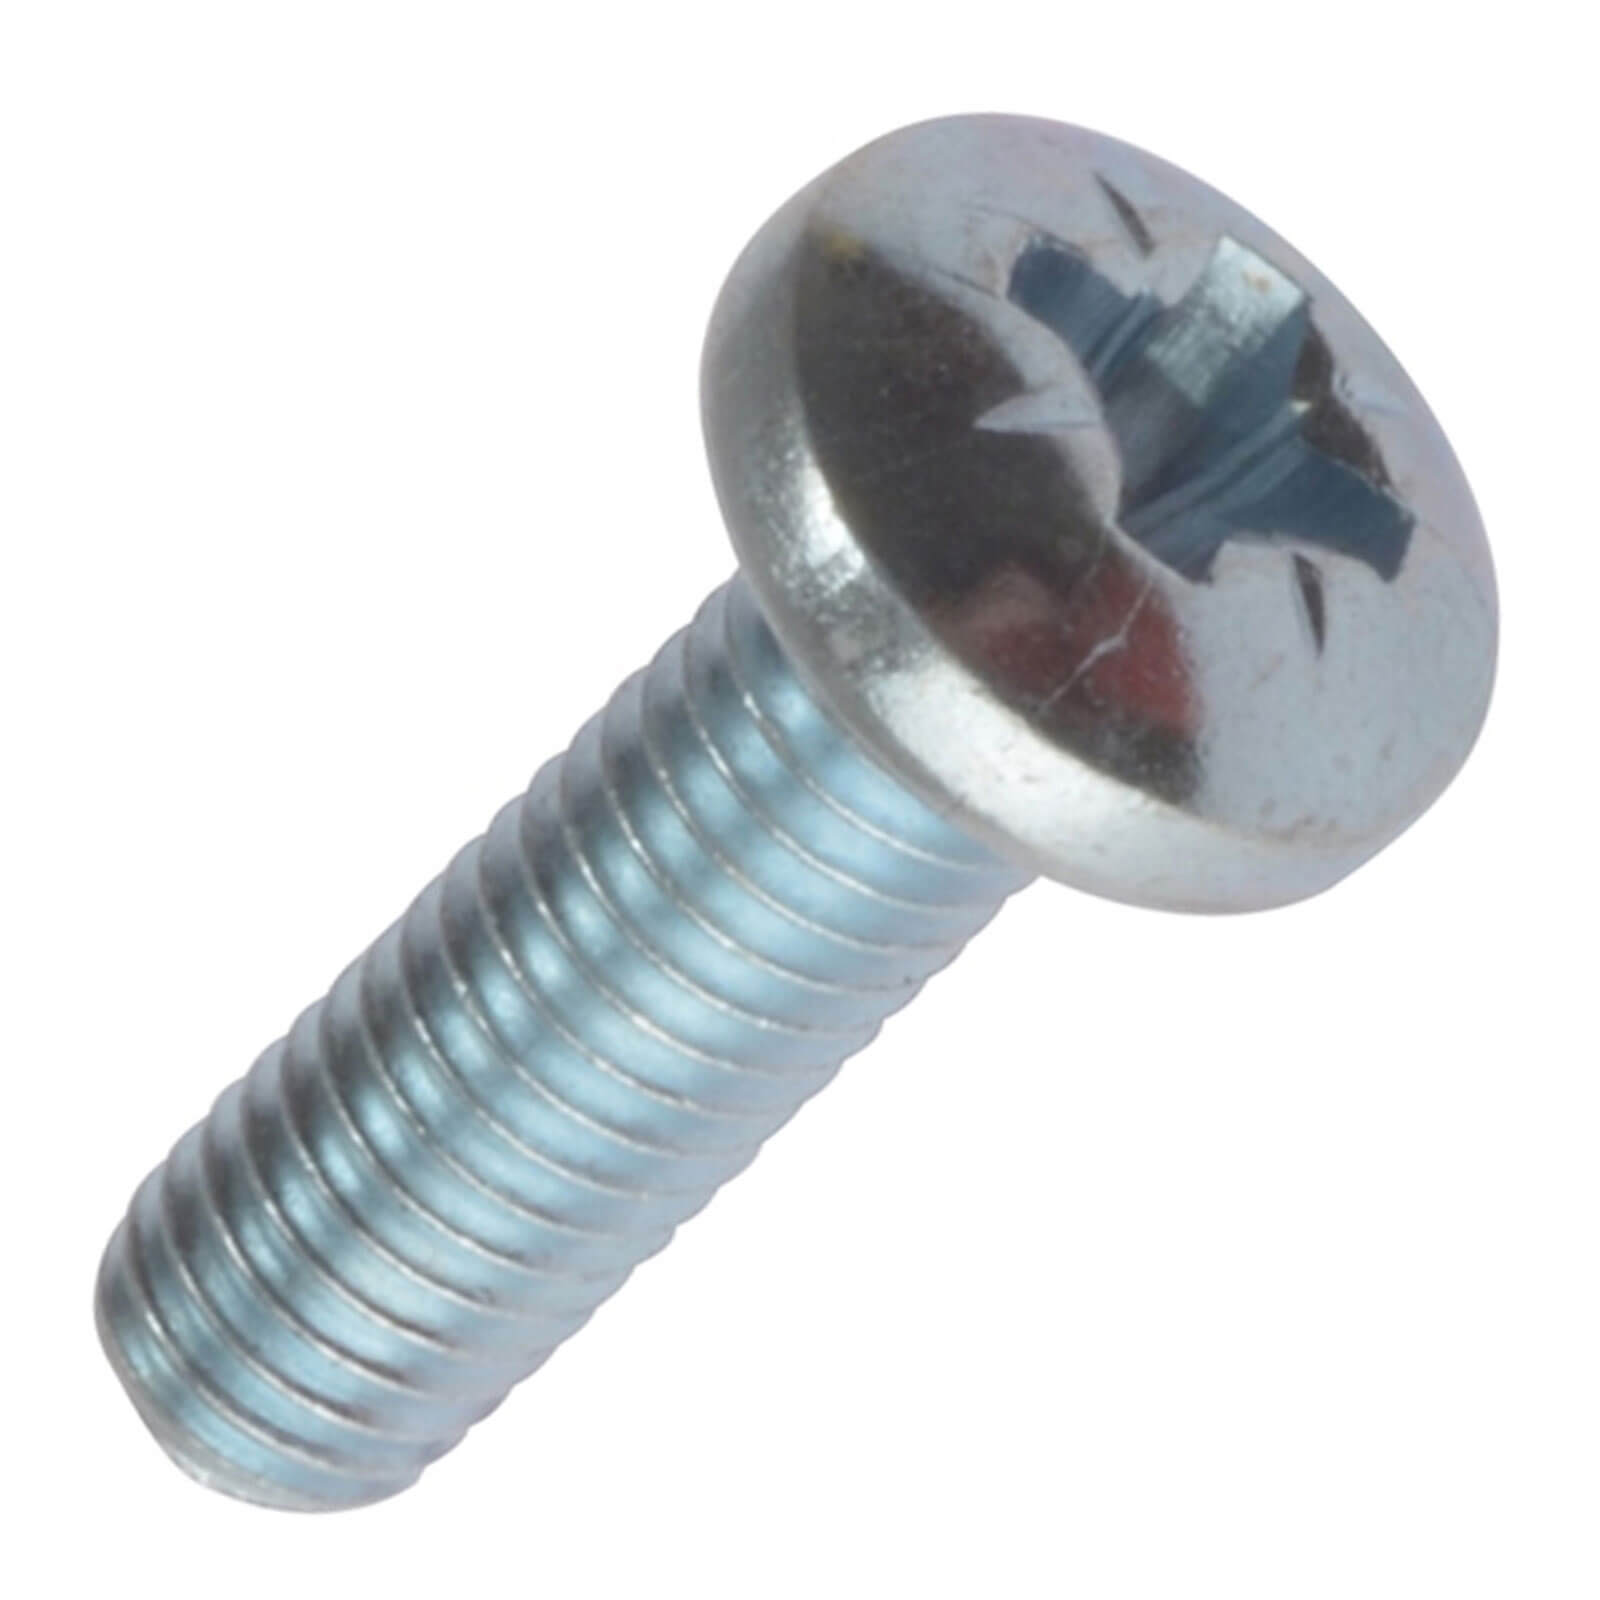 Photos - Nail / Screw / Fastener TIMCO Machine Screw Pozi Pan Head Bright Zinc Plated M4 30mm Pack of 100 4030PPM 